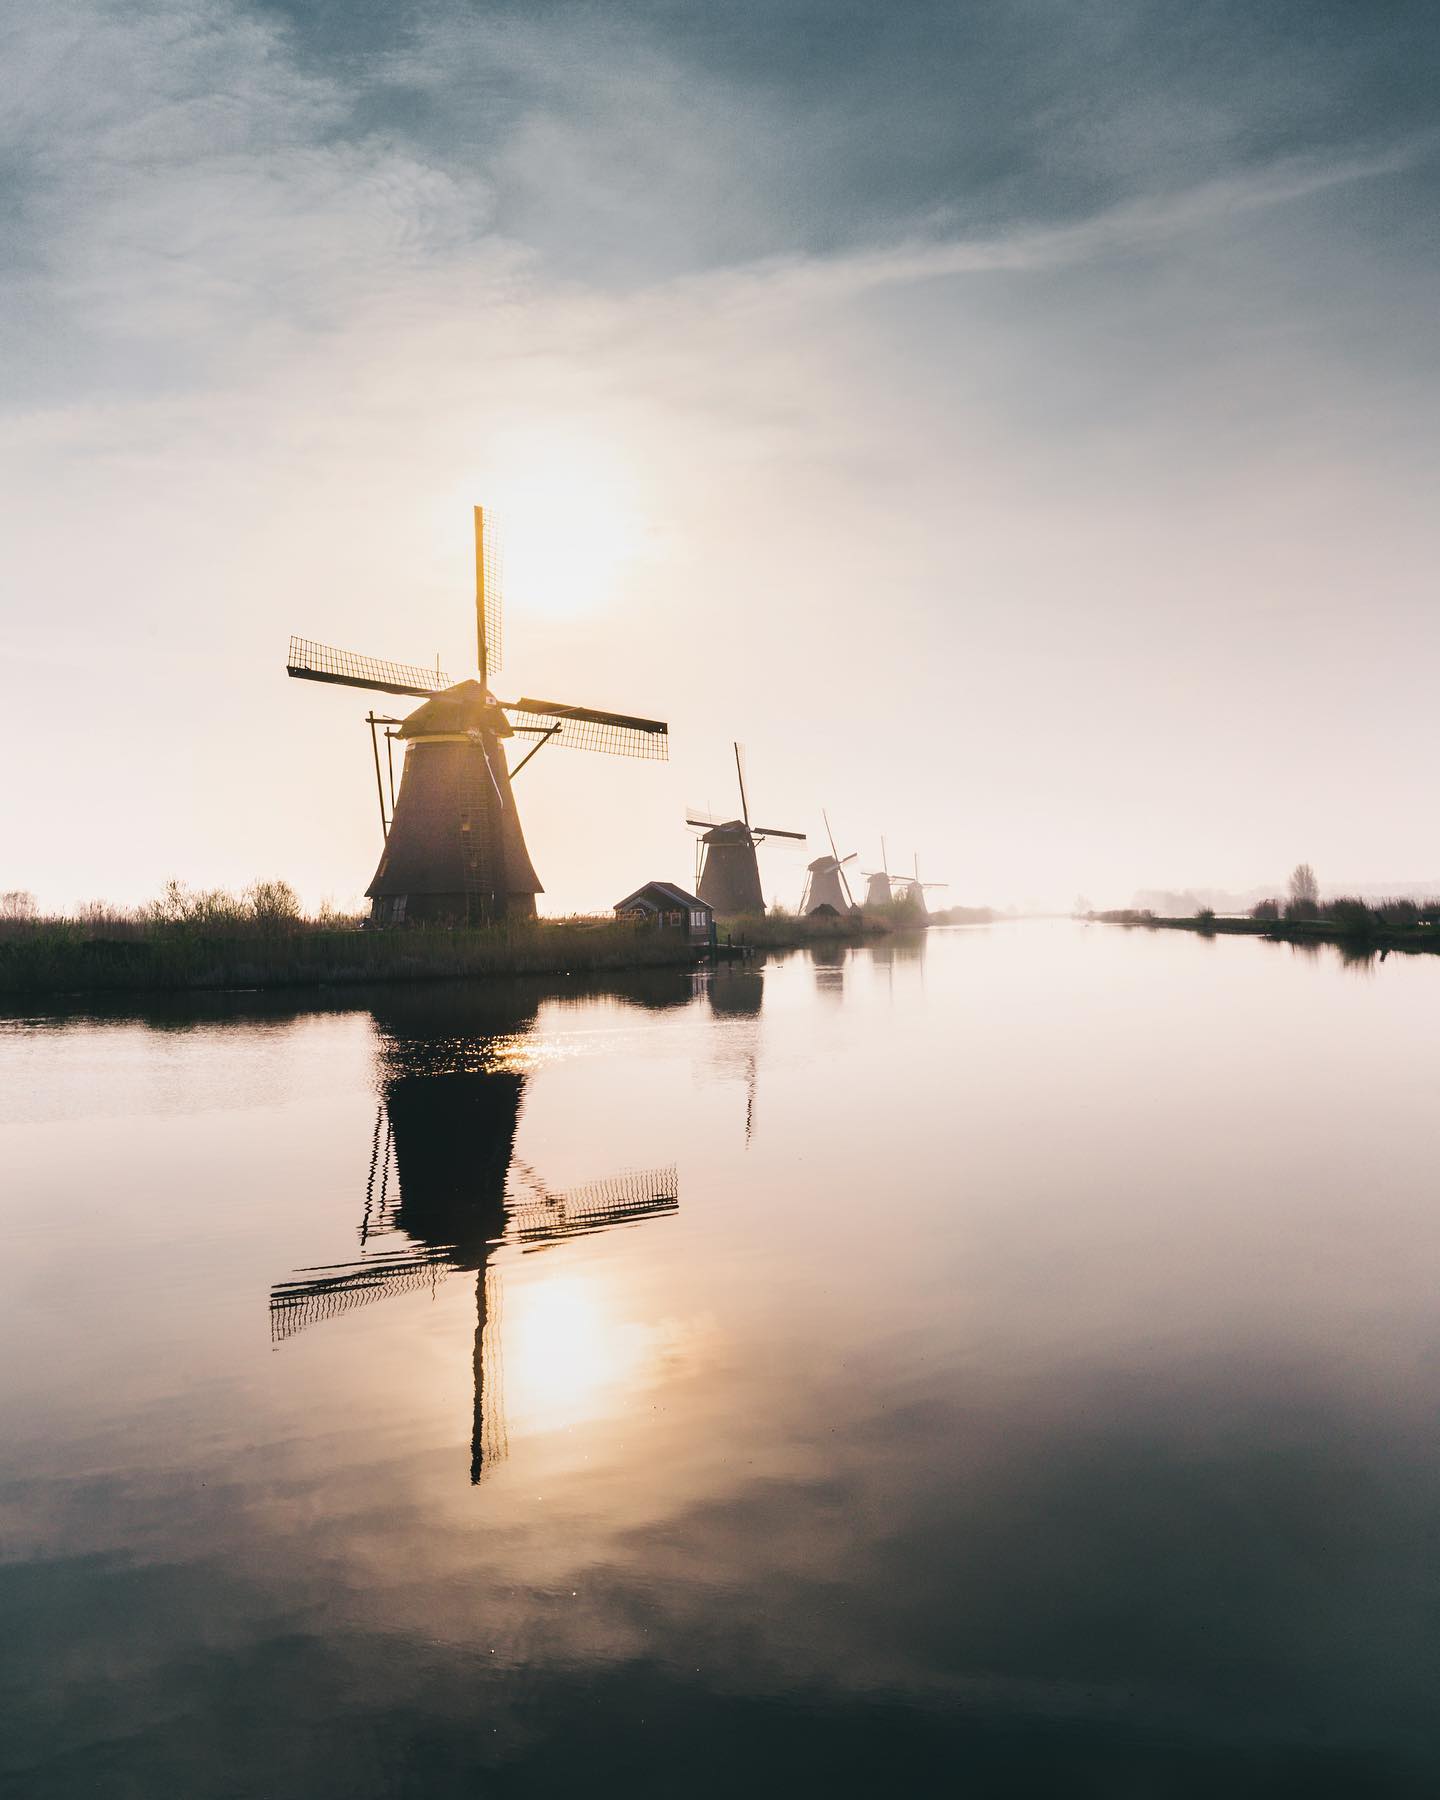 Sunrise at Kinderdijk in the Alblasserwaard polder, Netherlands. The group of 19 monumental windmills are UNESCO World Heritage.
.
.
.
#artofvisuals
#discoverearth
#earthfocus
#stayandwander
#earthpix
#ourplanetdaily
#beautifuldestinations
#bestvacations
#theoutbound
#discoverglobe
#awesome_earthpix
#exploremore
#wildernessculture
#welivetoexplore
#eclectic_shotz
#allaboutadventures
#canon_photos
#nakedplanet
#roamtheplanet
#tentree
#wonderful_places
#theglobewanderer
#travelstoke
#awesomeearth
#hellofrom
#mountainstones
#merknmountains
#vzcomood
#wanderlust
#liveforthestory .
@wanderforever_ @thewander.co @sharegermany @moodygrams @stayandwander @visualsofearth @earthpix @seefreunde @stayandwander @visualvibesgermany @grmnyvacations